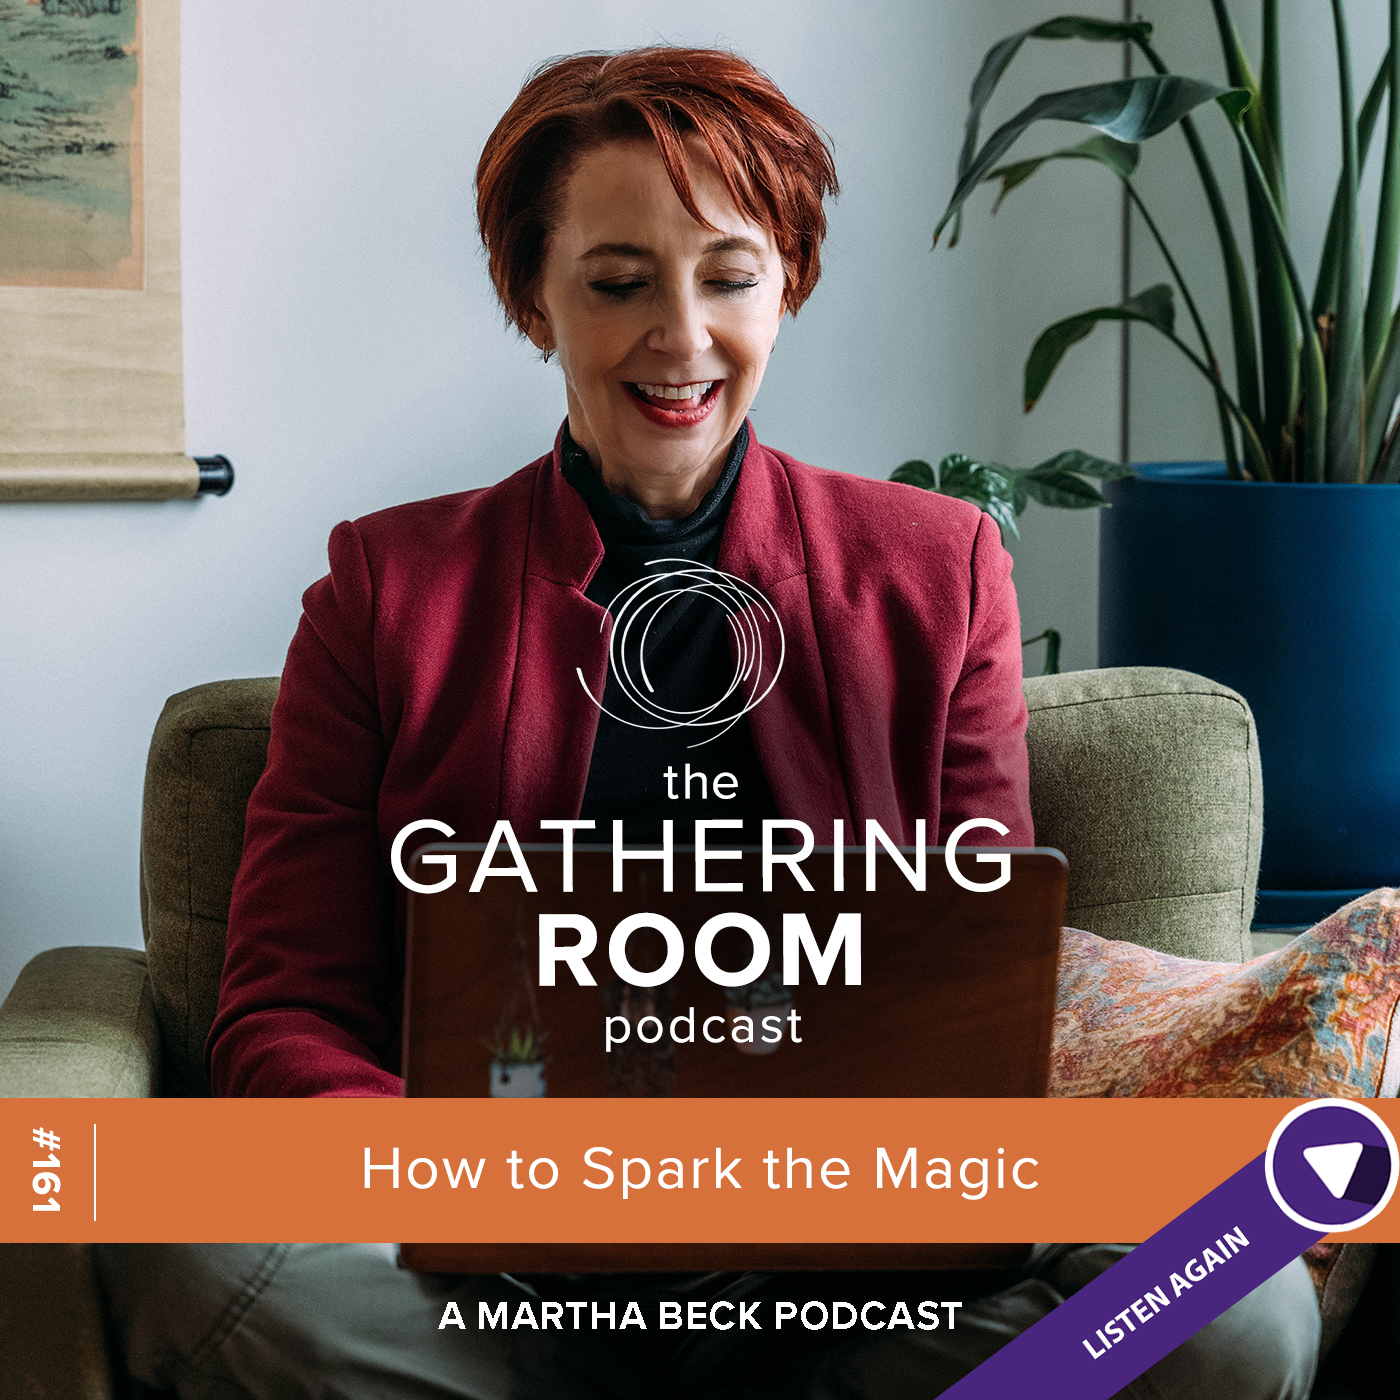 Image for The Gathering Pod A Martha Beck Podcast Episode #161 Listen Again: How to Spark the Magic